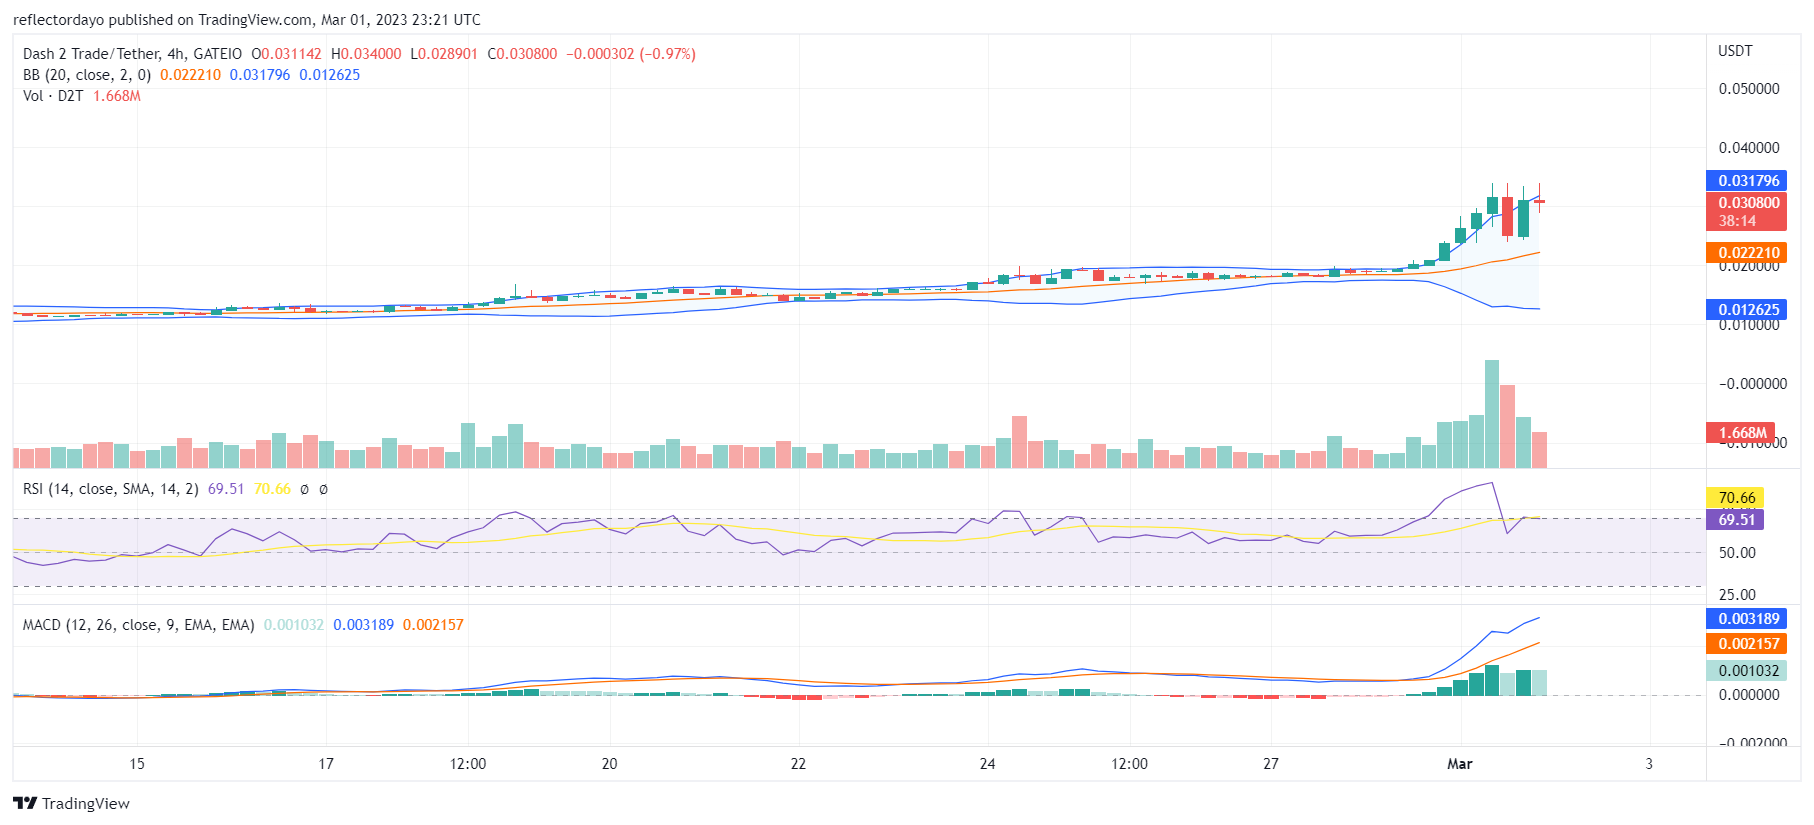 Dash 2 Trade (D2T)’s Price Is off to the Moon